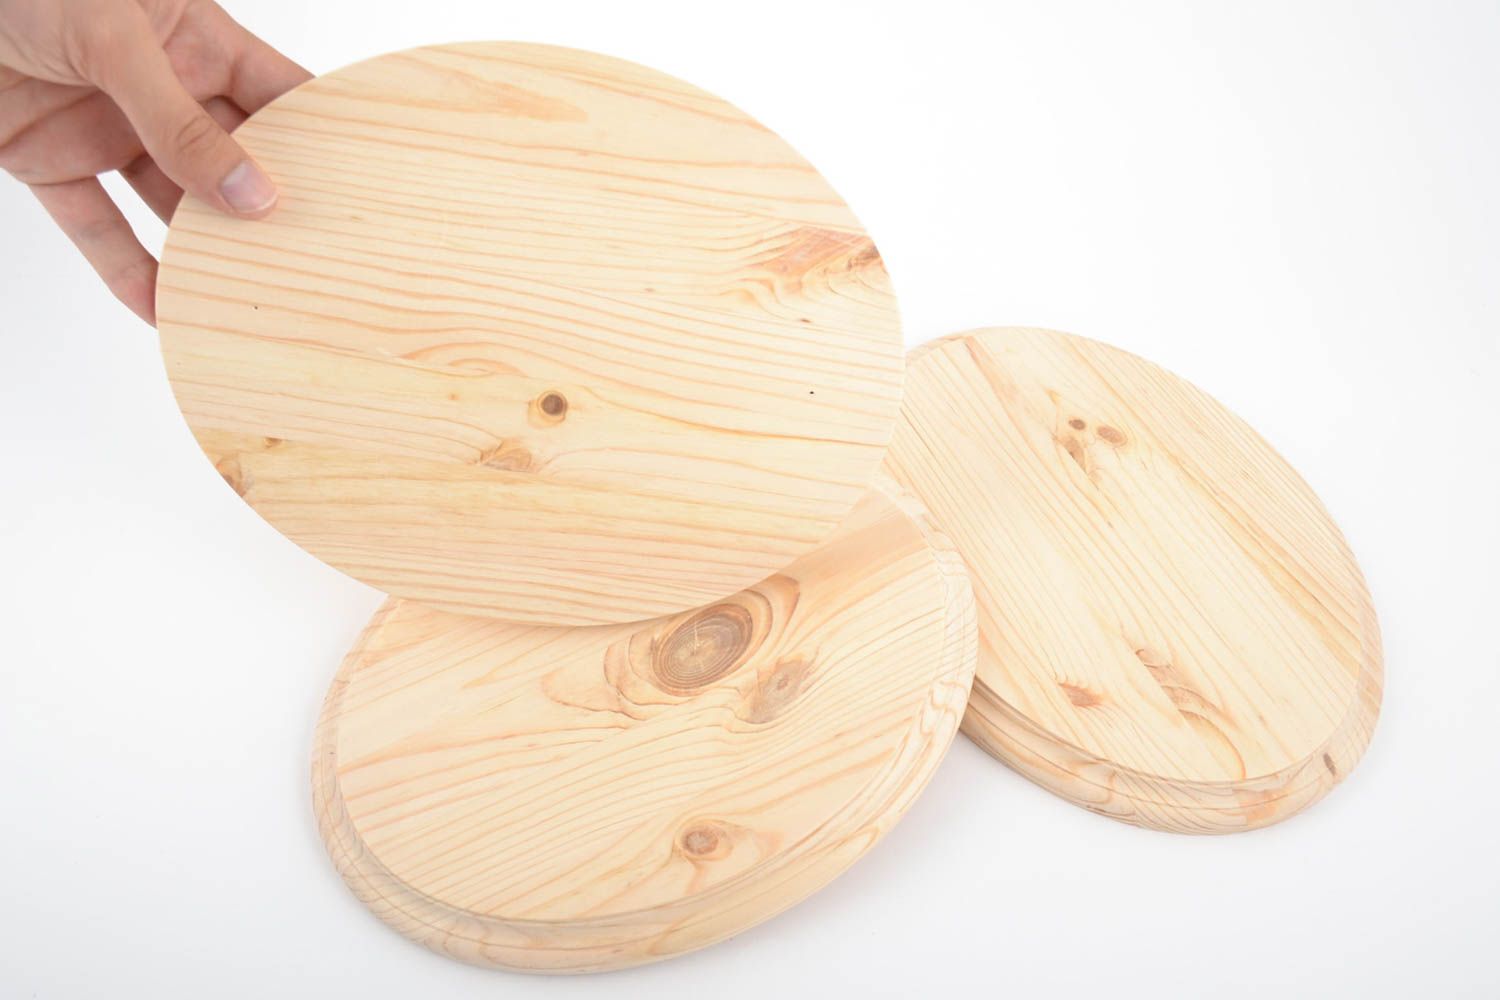 Set of blanks for wall panels made of wood 3 pieces large oval handmade decor photo 5